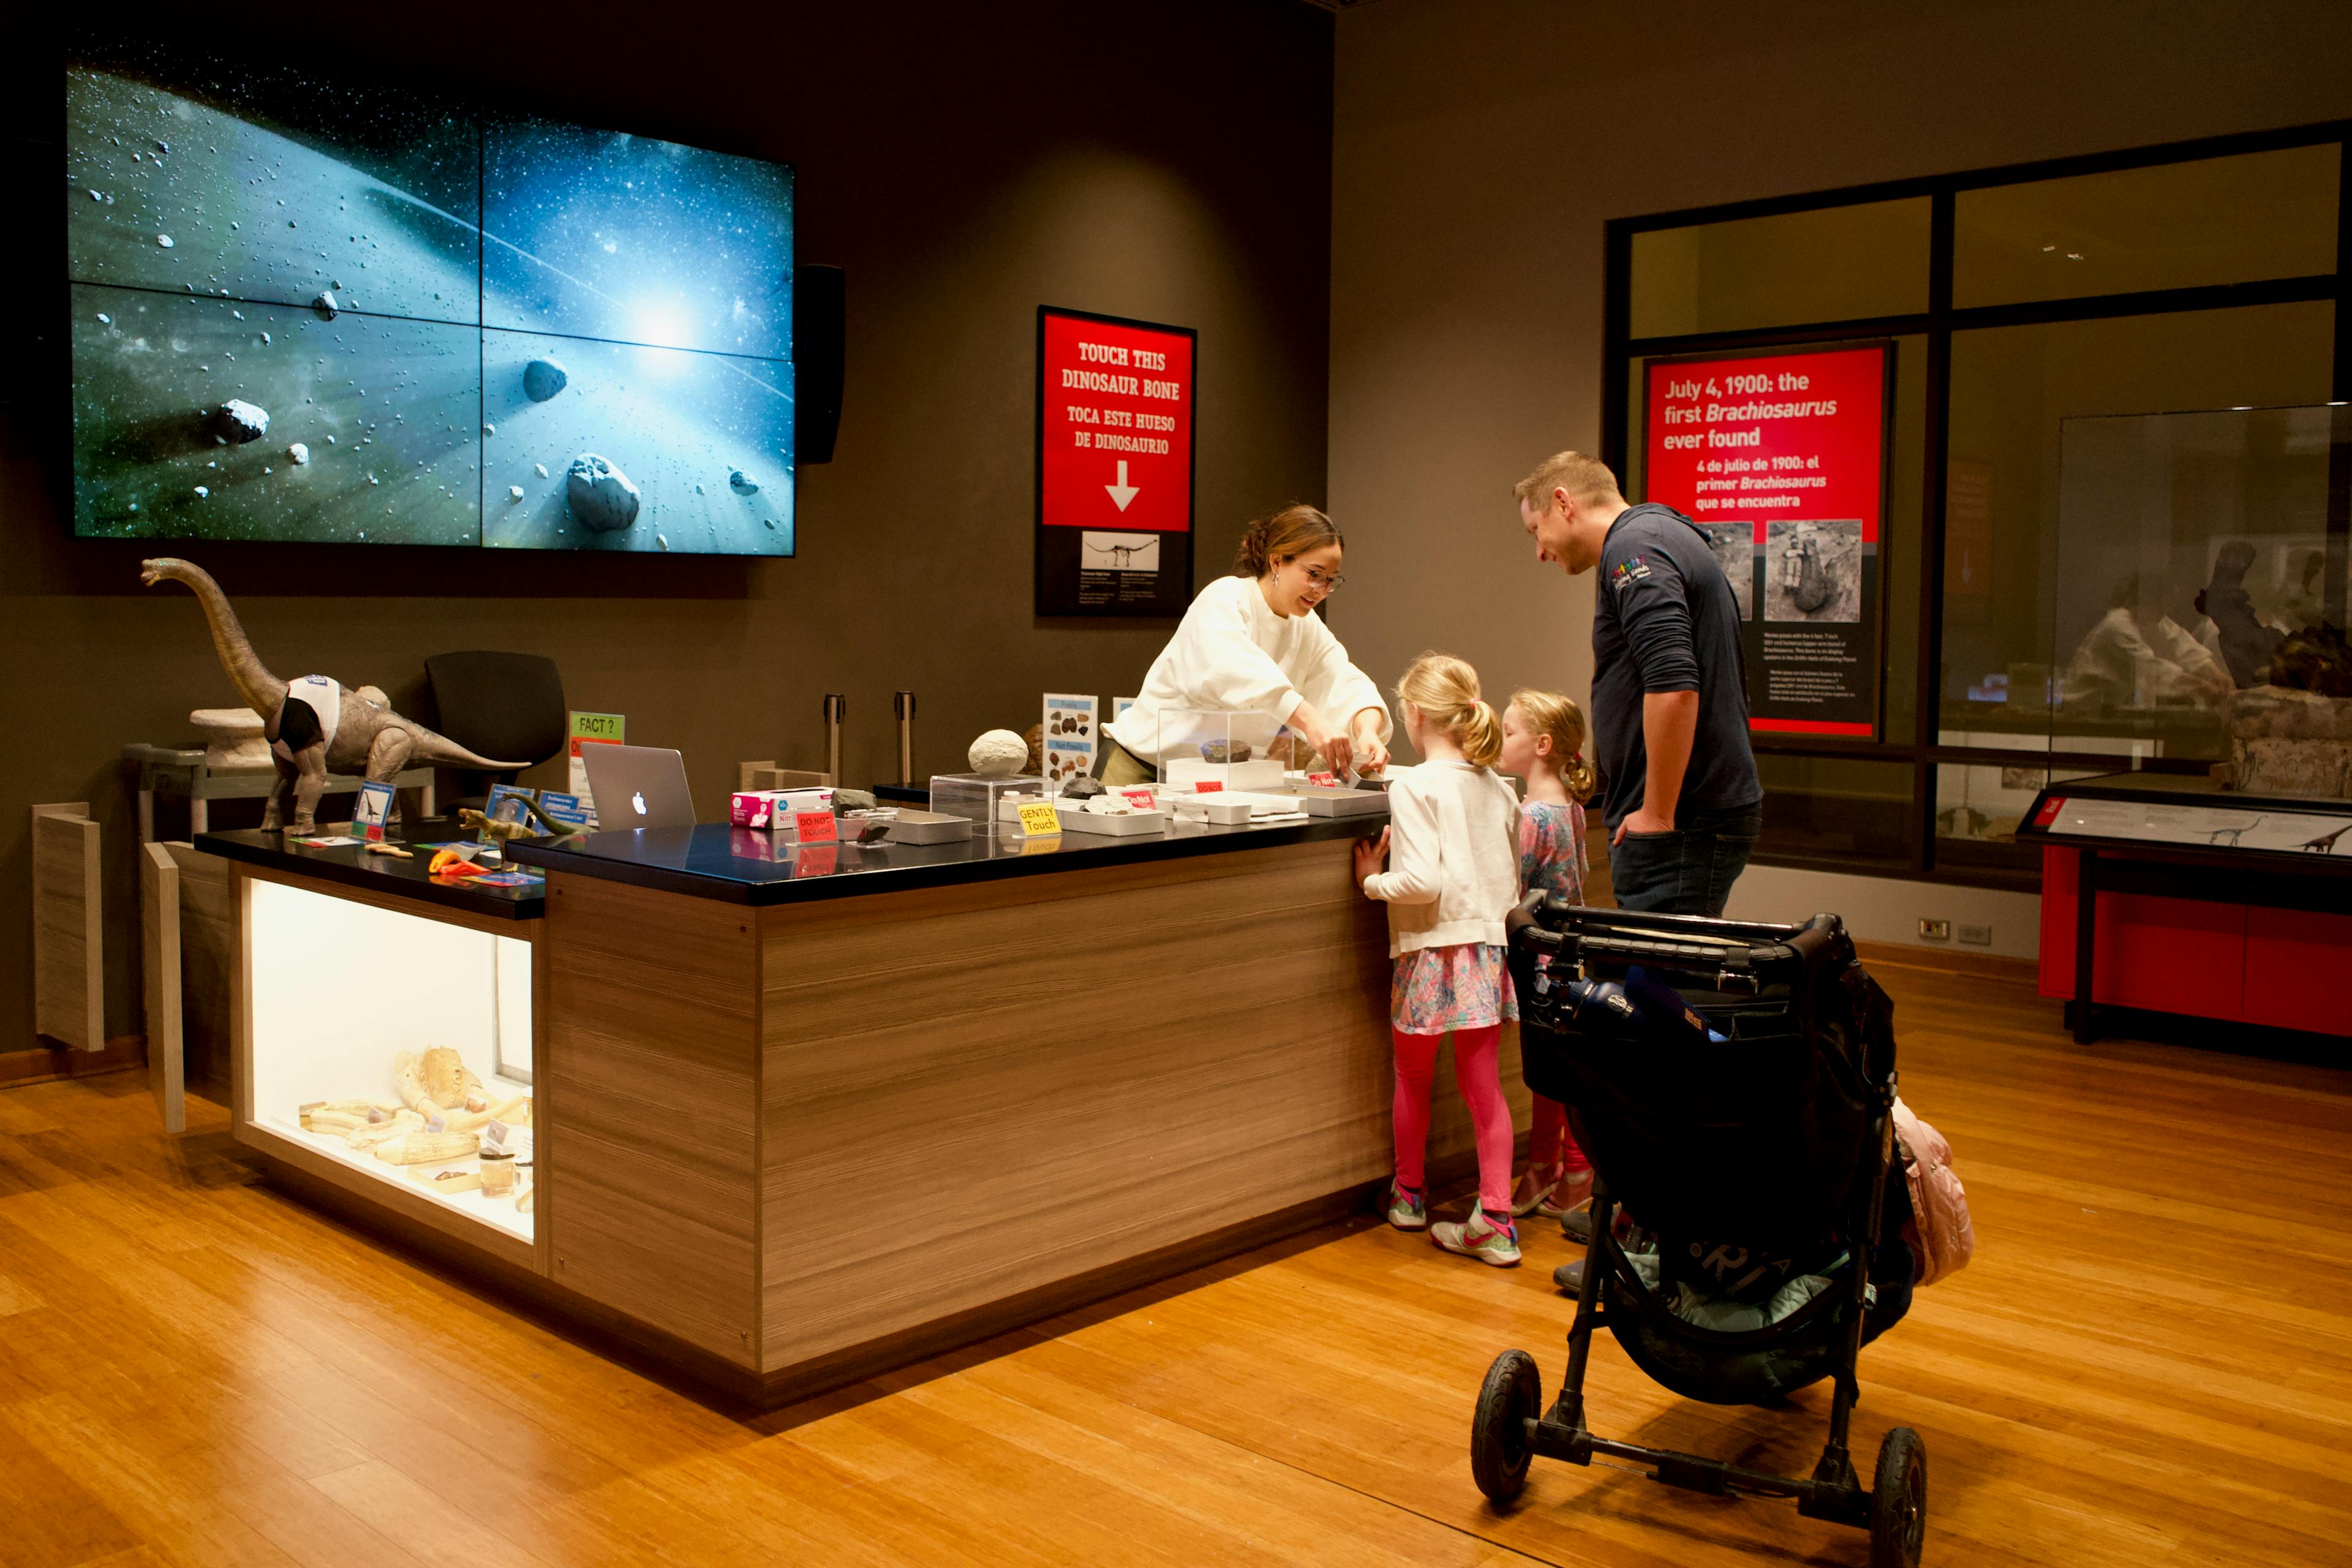 An adult and two children interact with a museum staff member who stands behind a counter in the Science Hub. On the counter are objects and specimens related to the content in the exhibit. A large video screen hangs on the wall behind the counter.